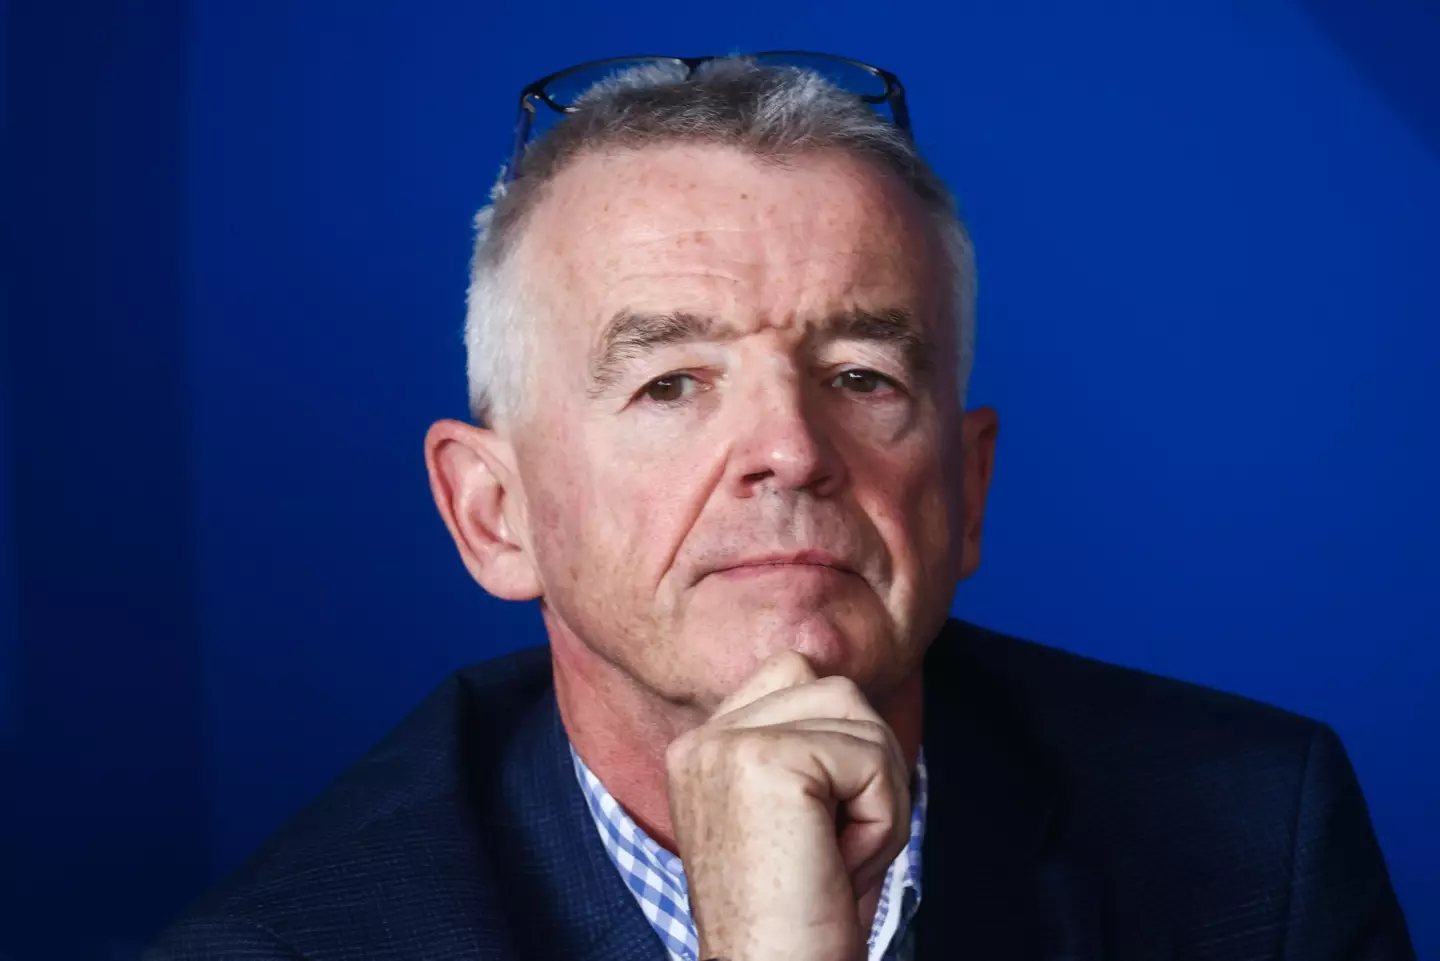 Michael O'Leary was appointed as Ryanair's CEO in 1994.